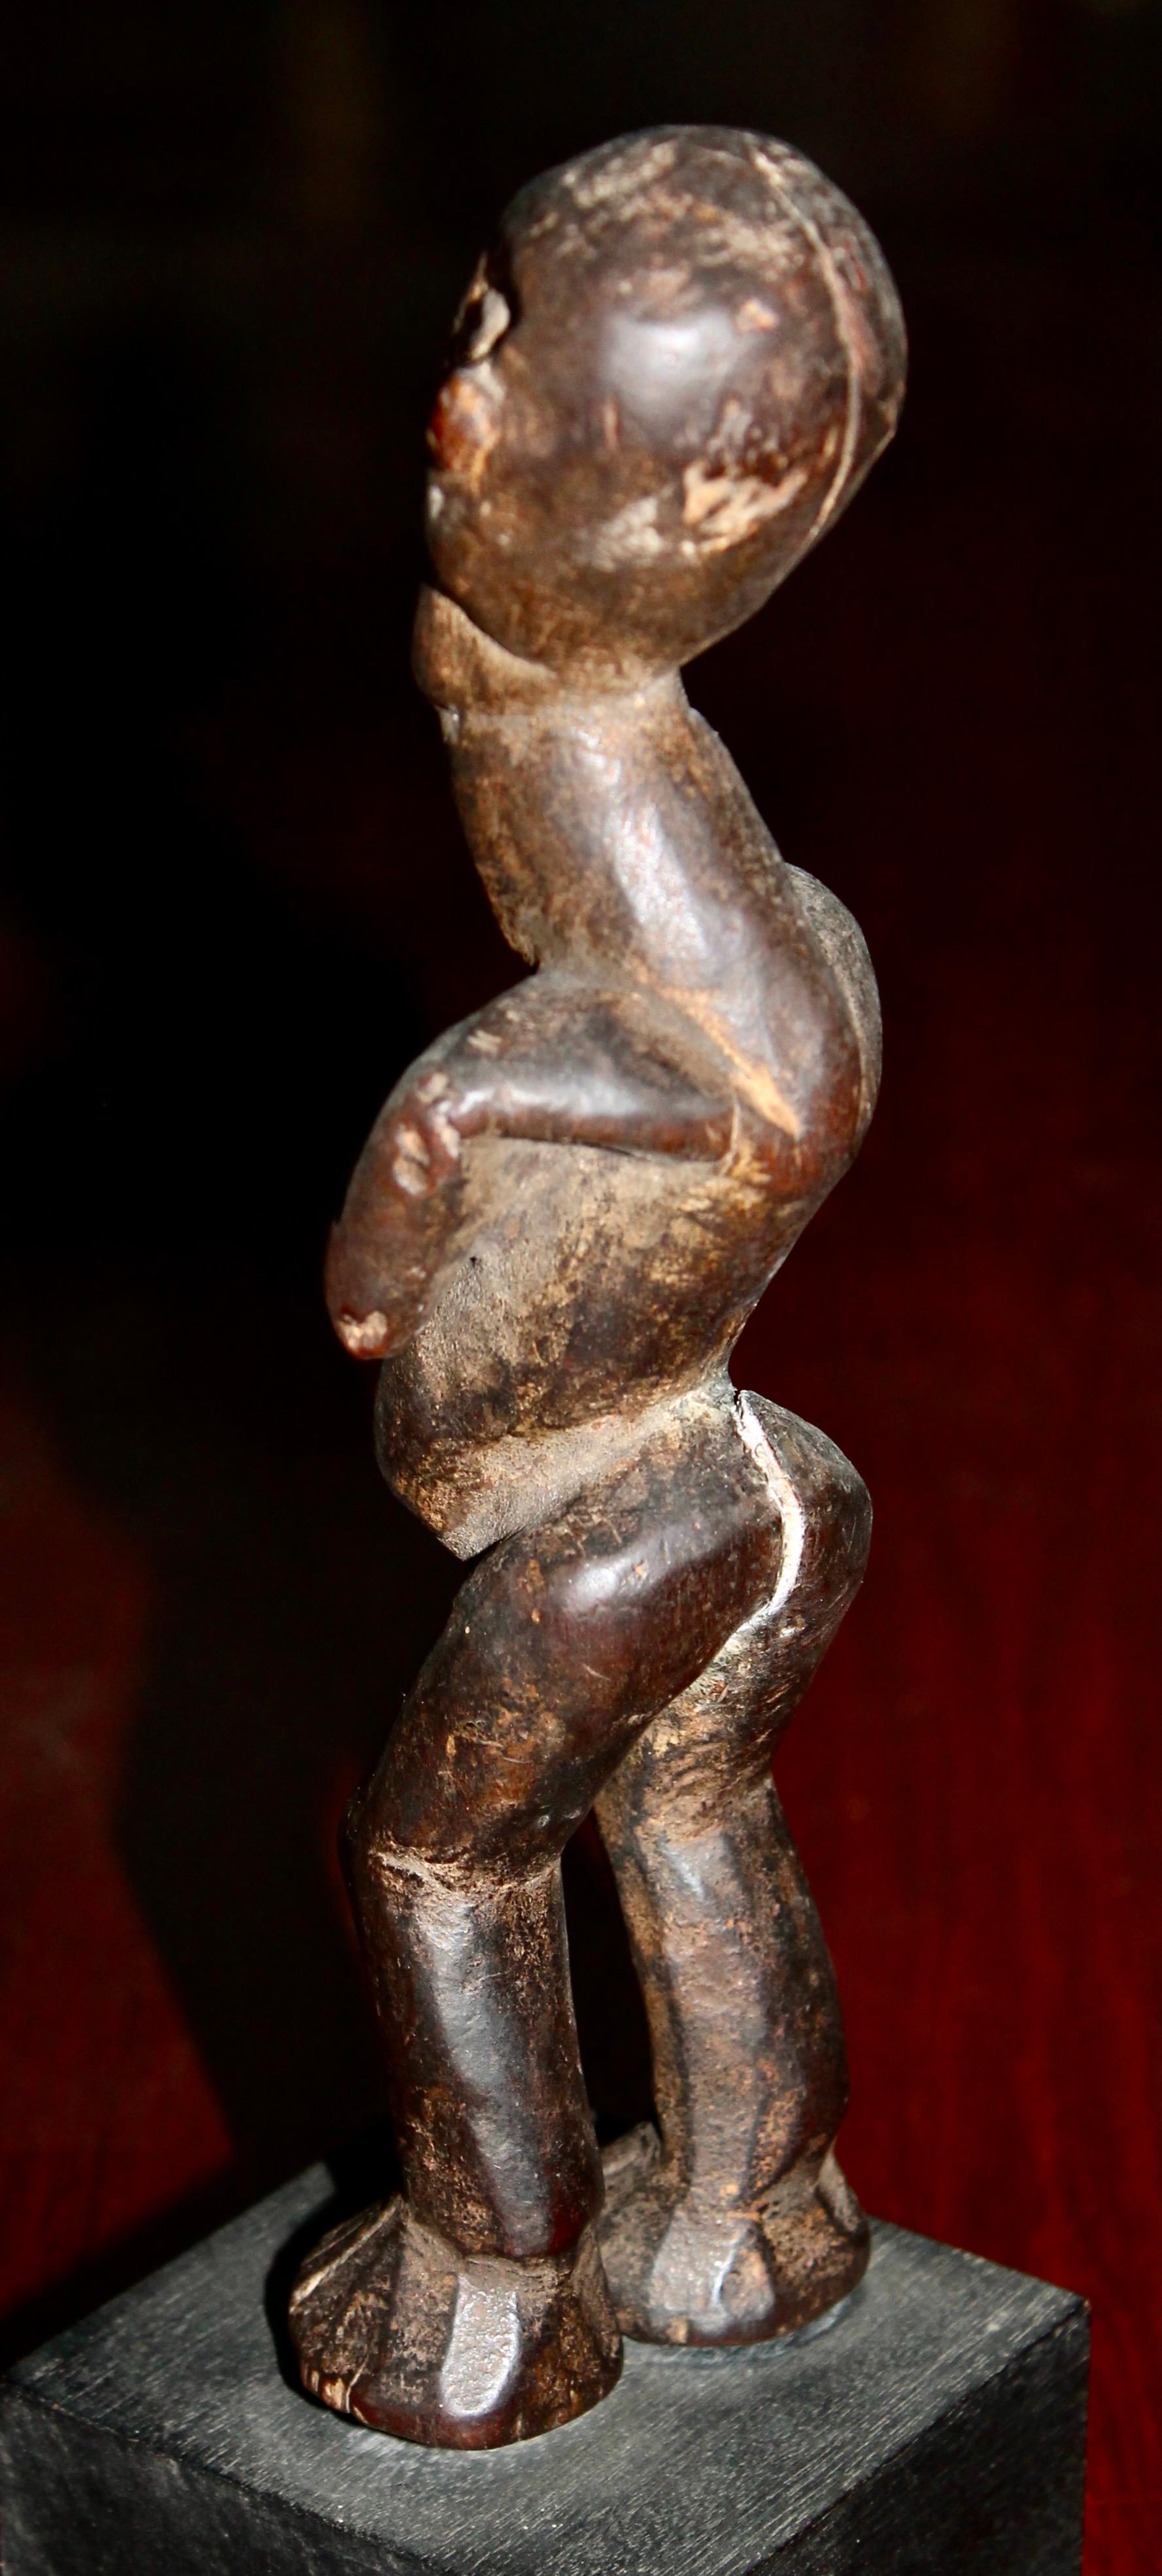 Cameroonian Small Cameroon Bangwa Figure Ex Egon Guenther Collection Sothebys